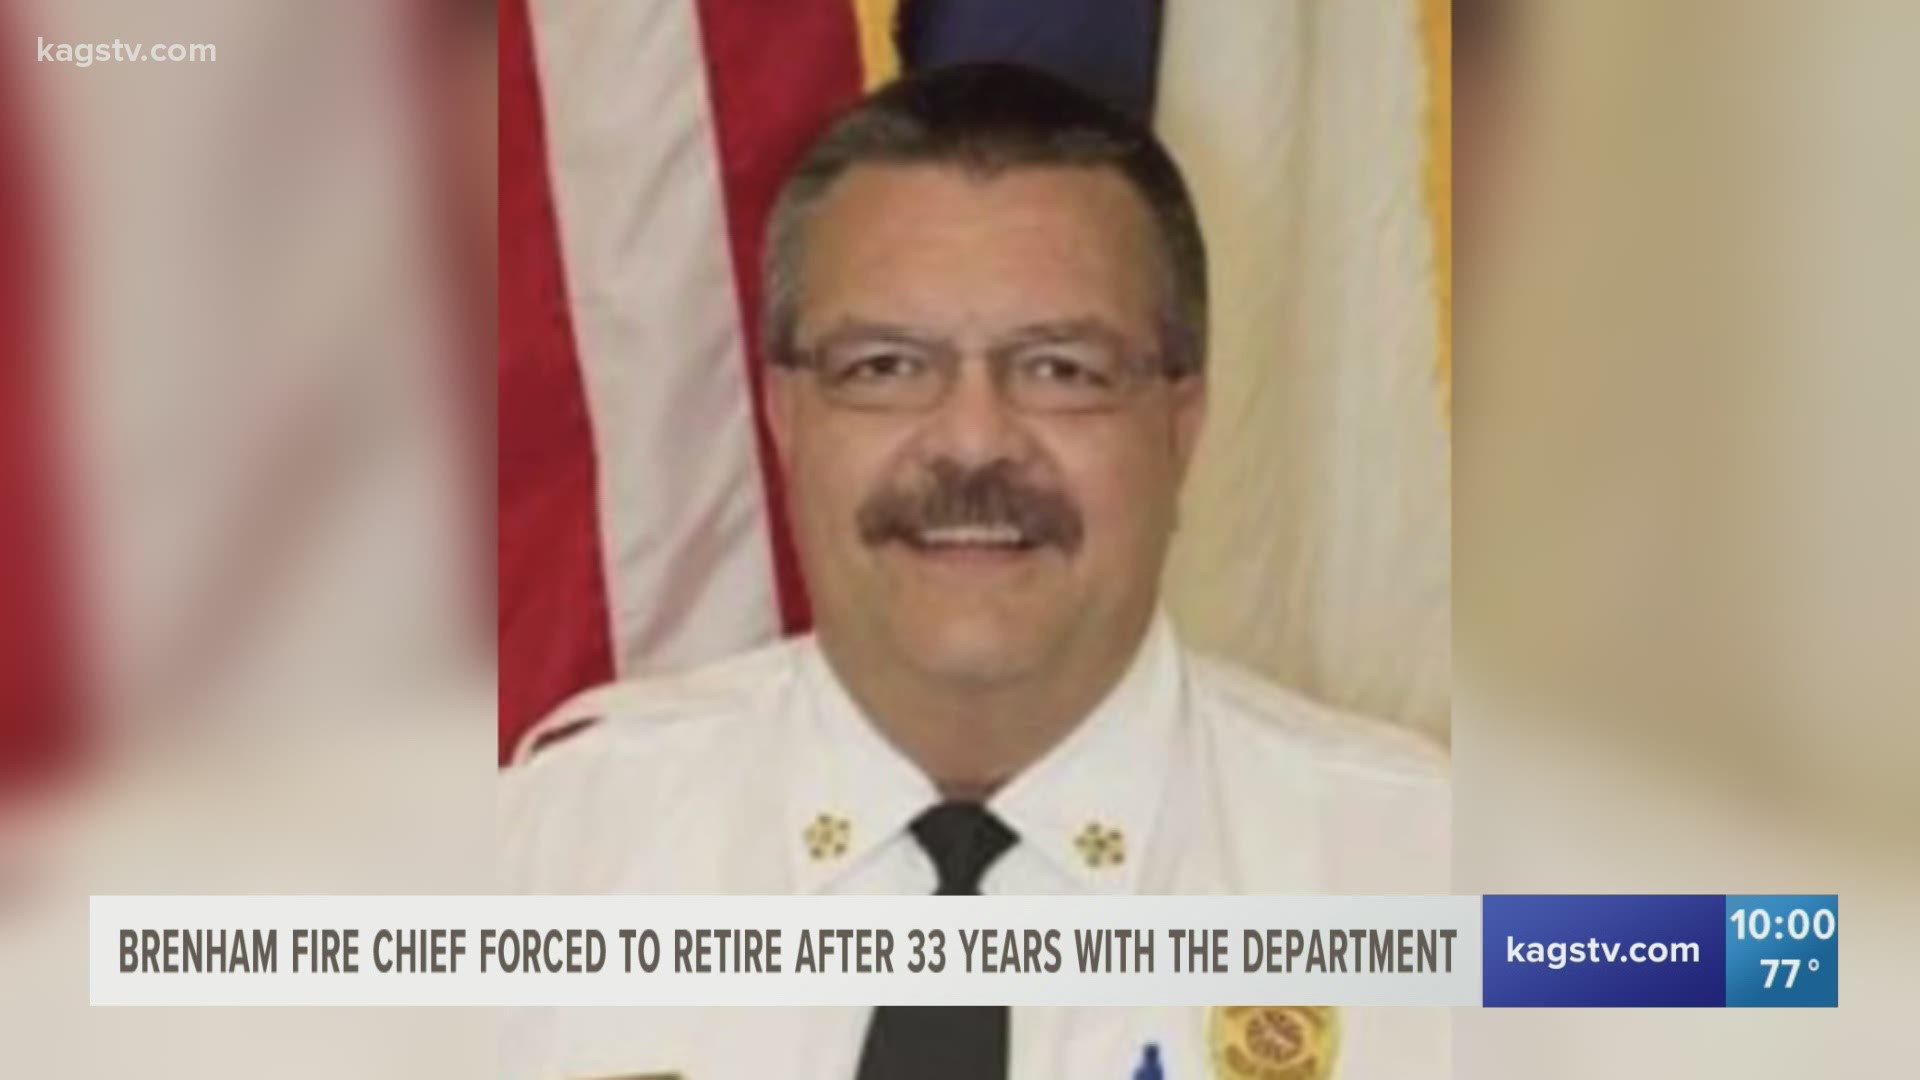 After 33 years of service with the Brenham Fire Department, Fire Chief Ricky Boeker’s chapter at the department has come to a sudden close.